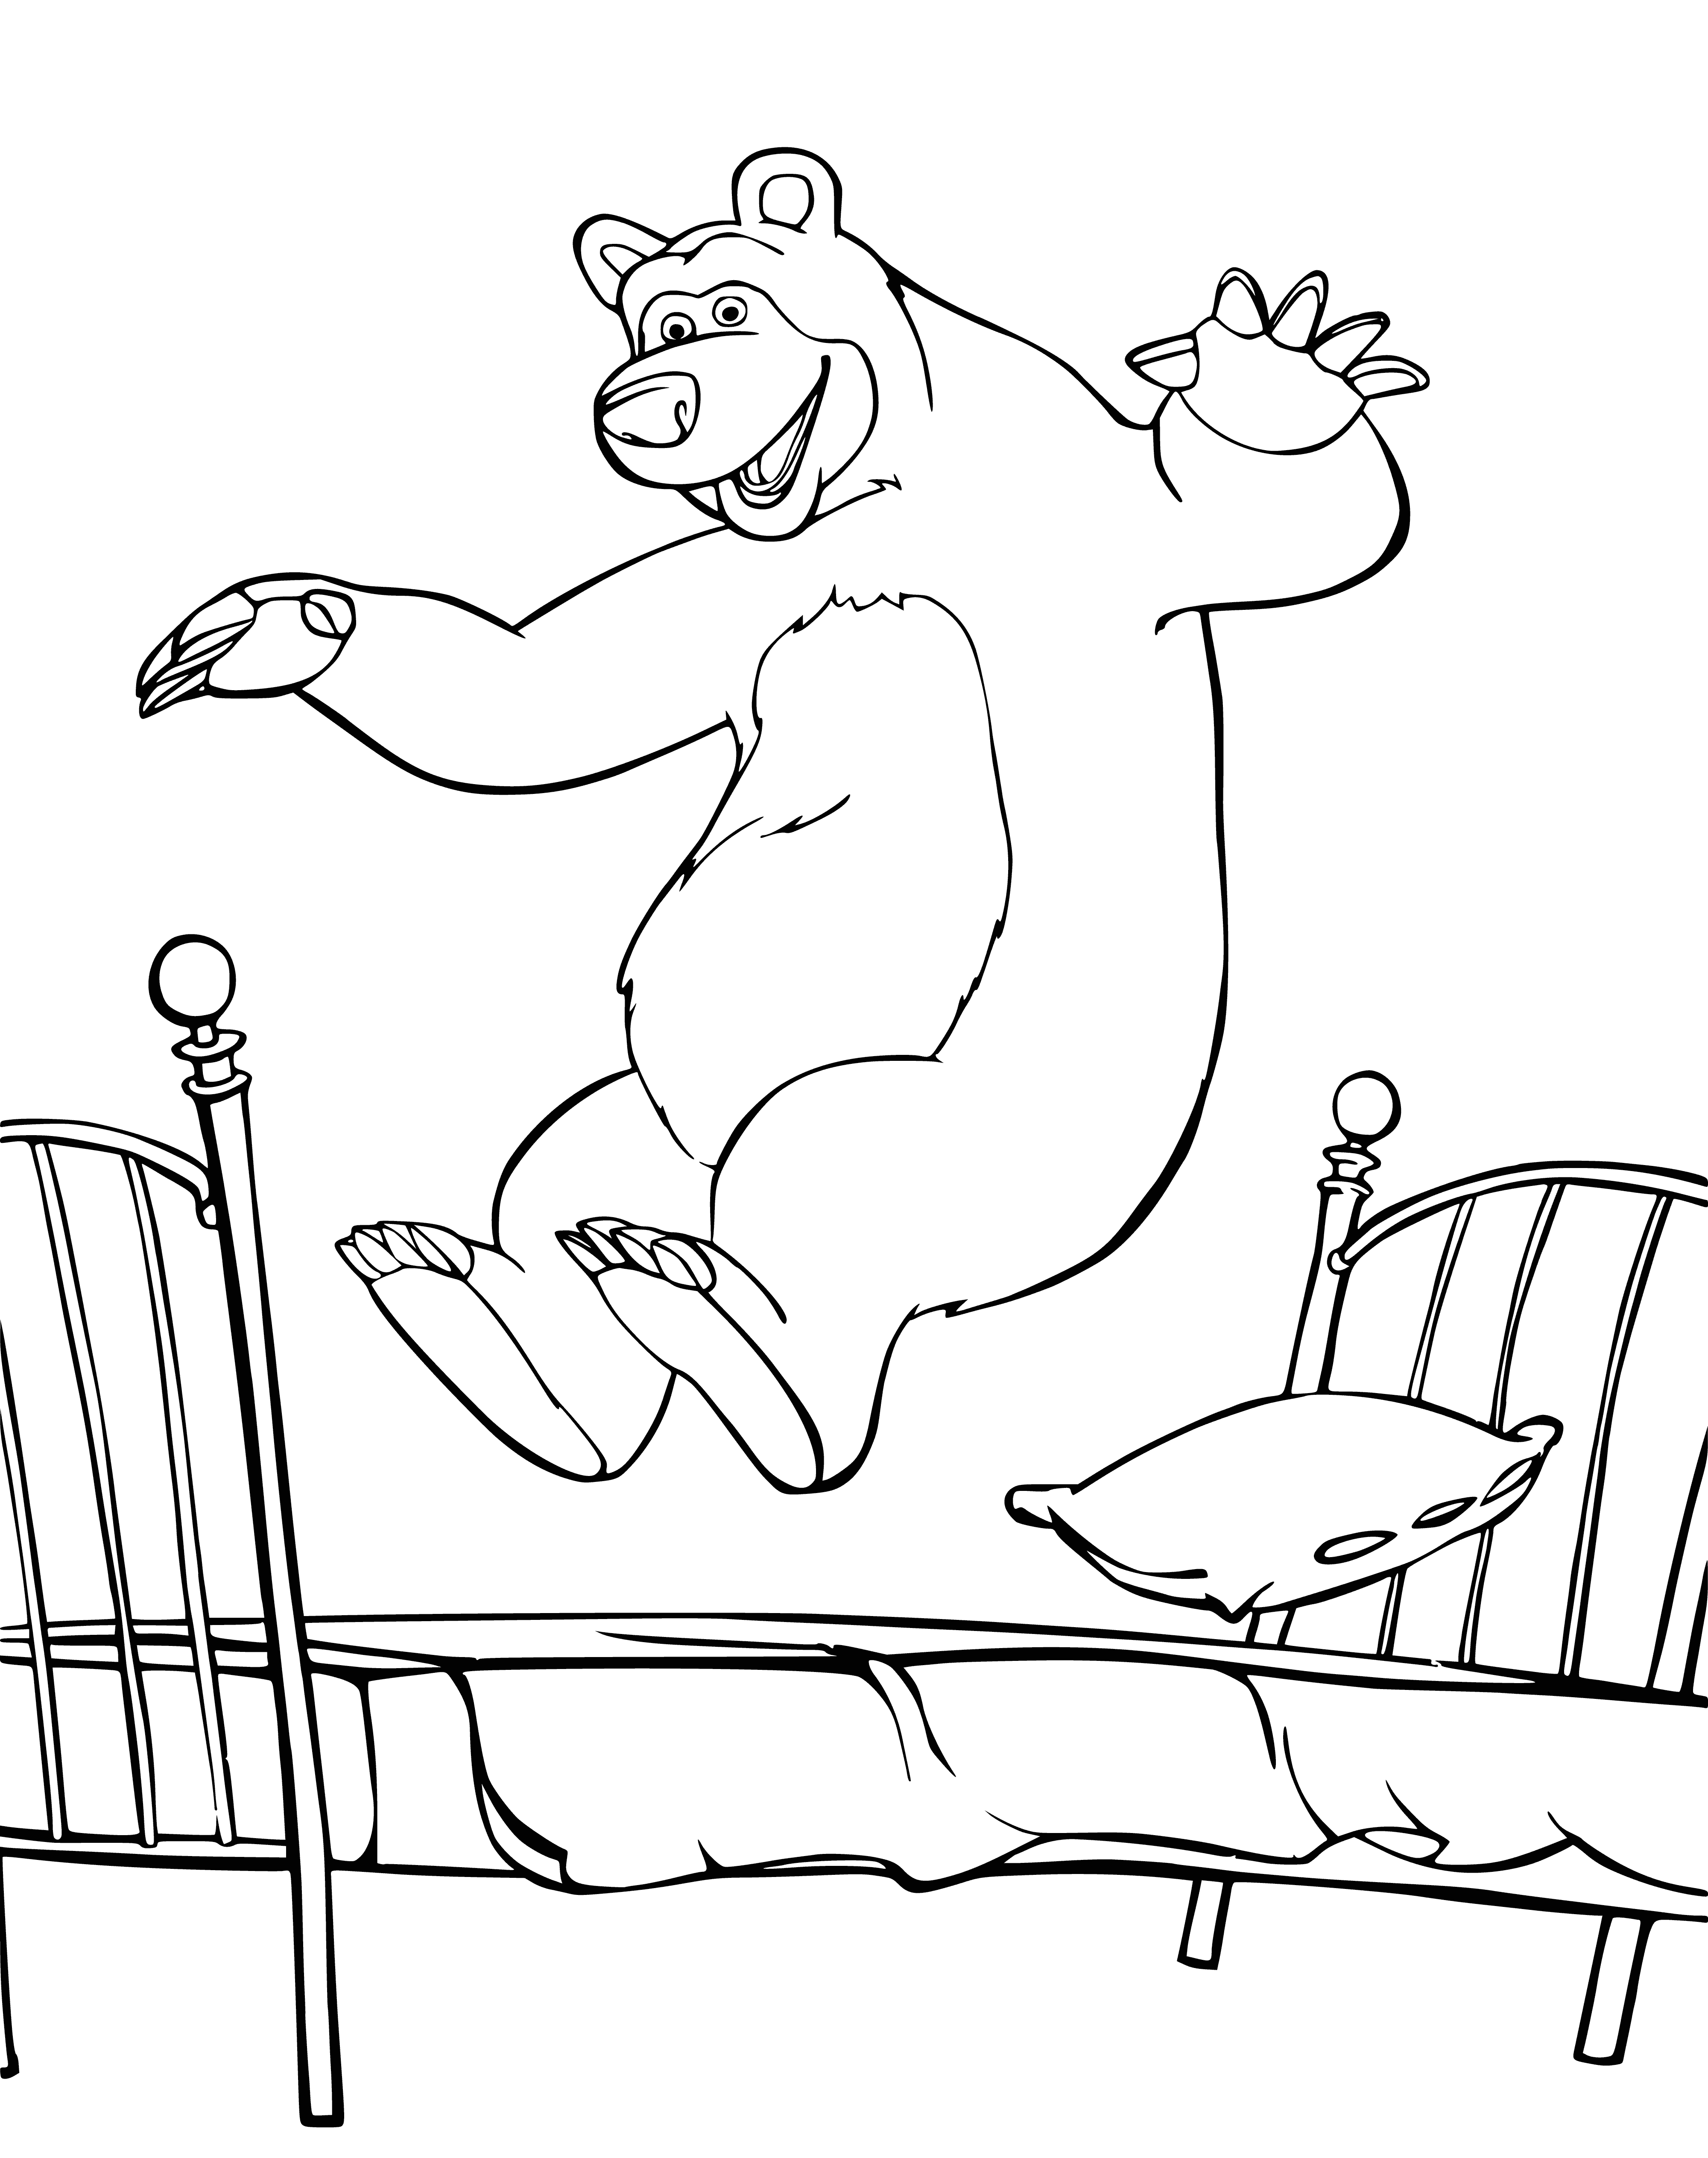 coloring page: Masha laughs as bear stands on hind legs, reaches arms up, tongue out. She is holding her hands up, big smile on face.